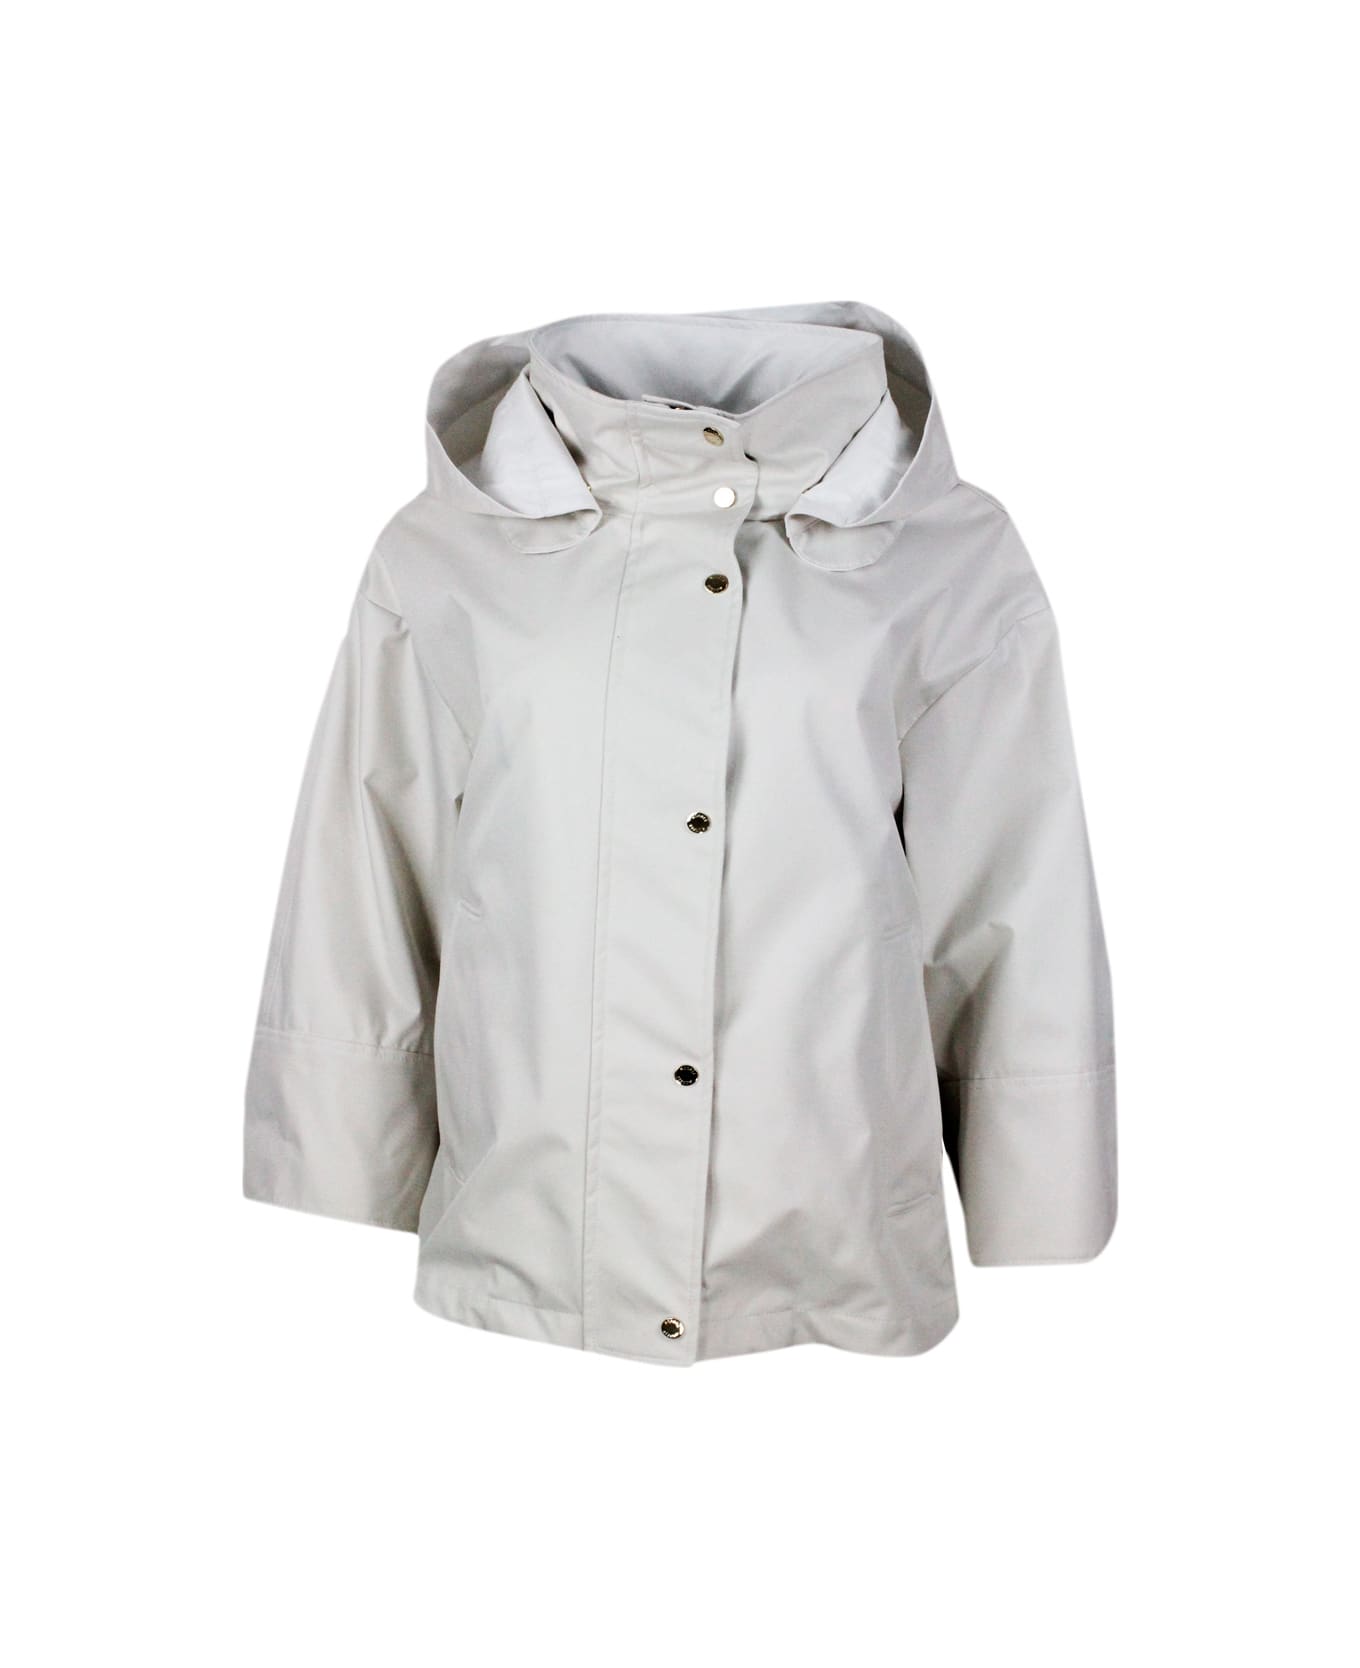 Moorer Jacket In Fine Waterproof Material 2 Umbrellas With Detachable Hood, Side Zips On The Sides And Internal Drawstring. Zip And Snap Button Closure - Avorio light bianco ジャケット